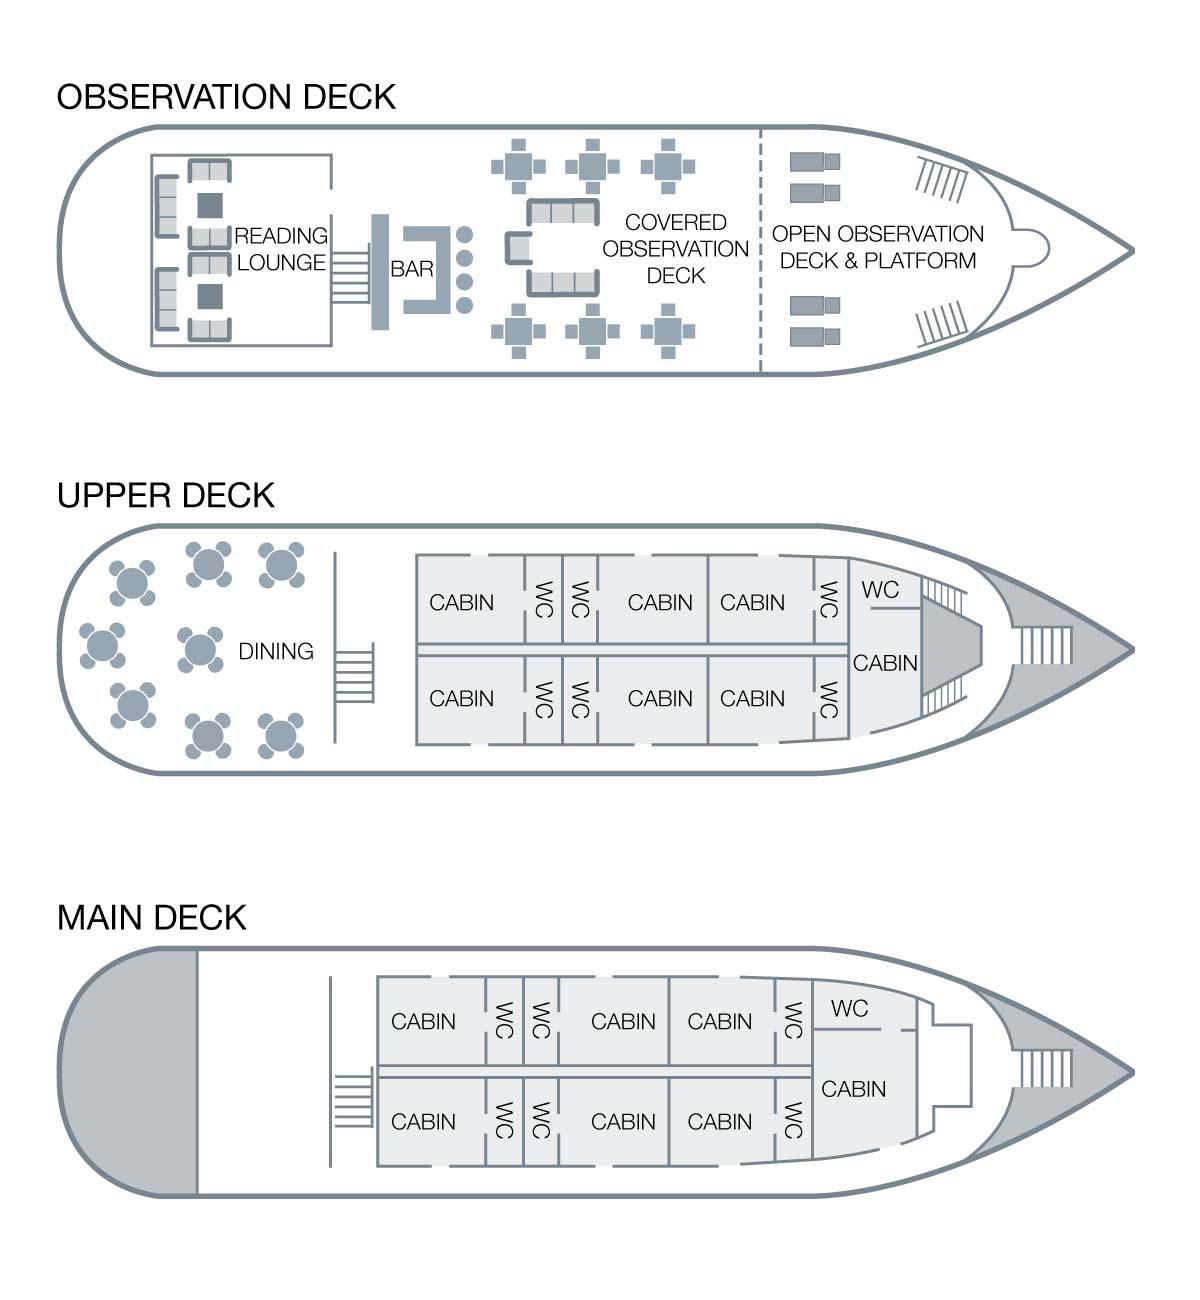 Deck plan of Amatista Amazon Riverboat, with 3 passenger decks, 2 of which have 7 double cabins each.